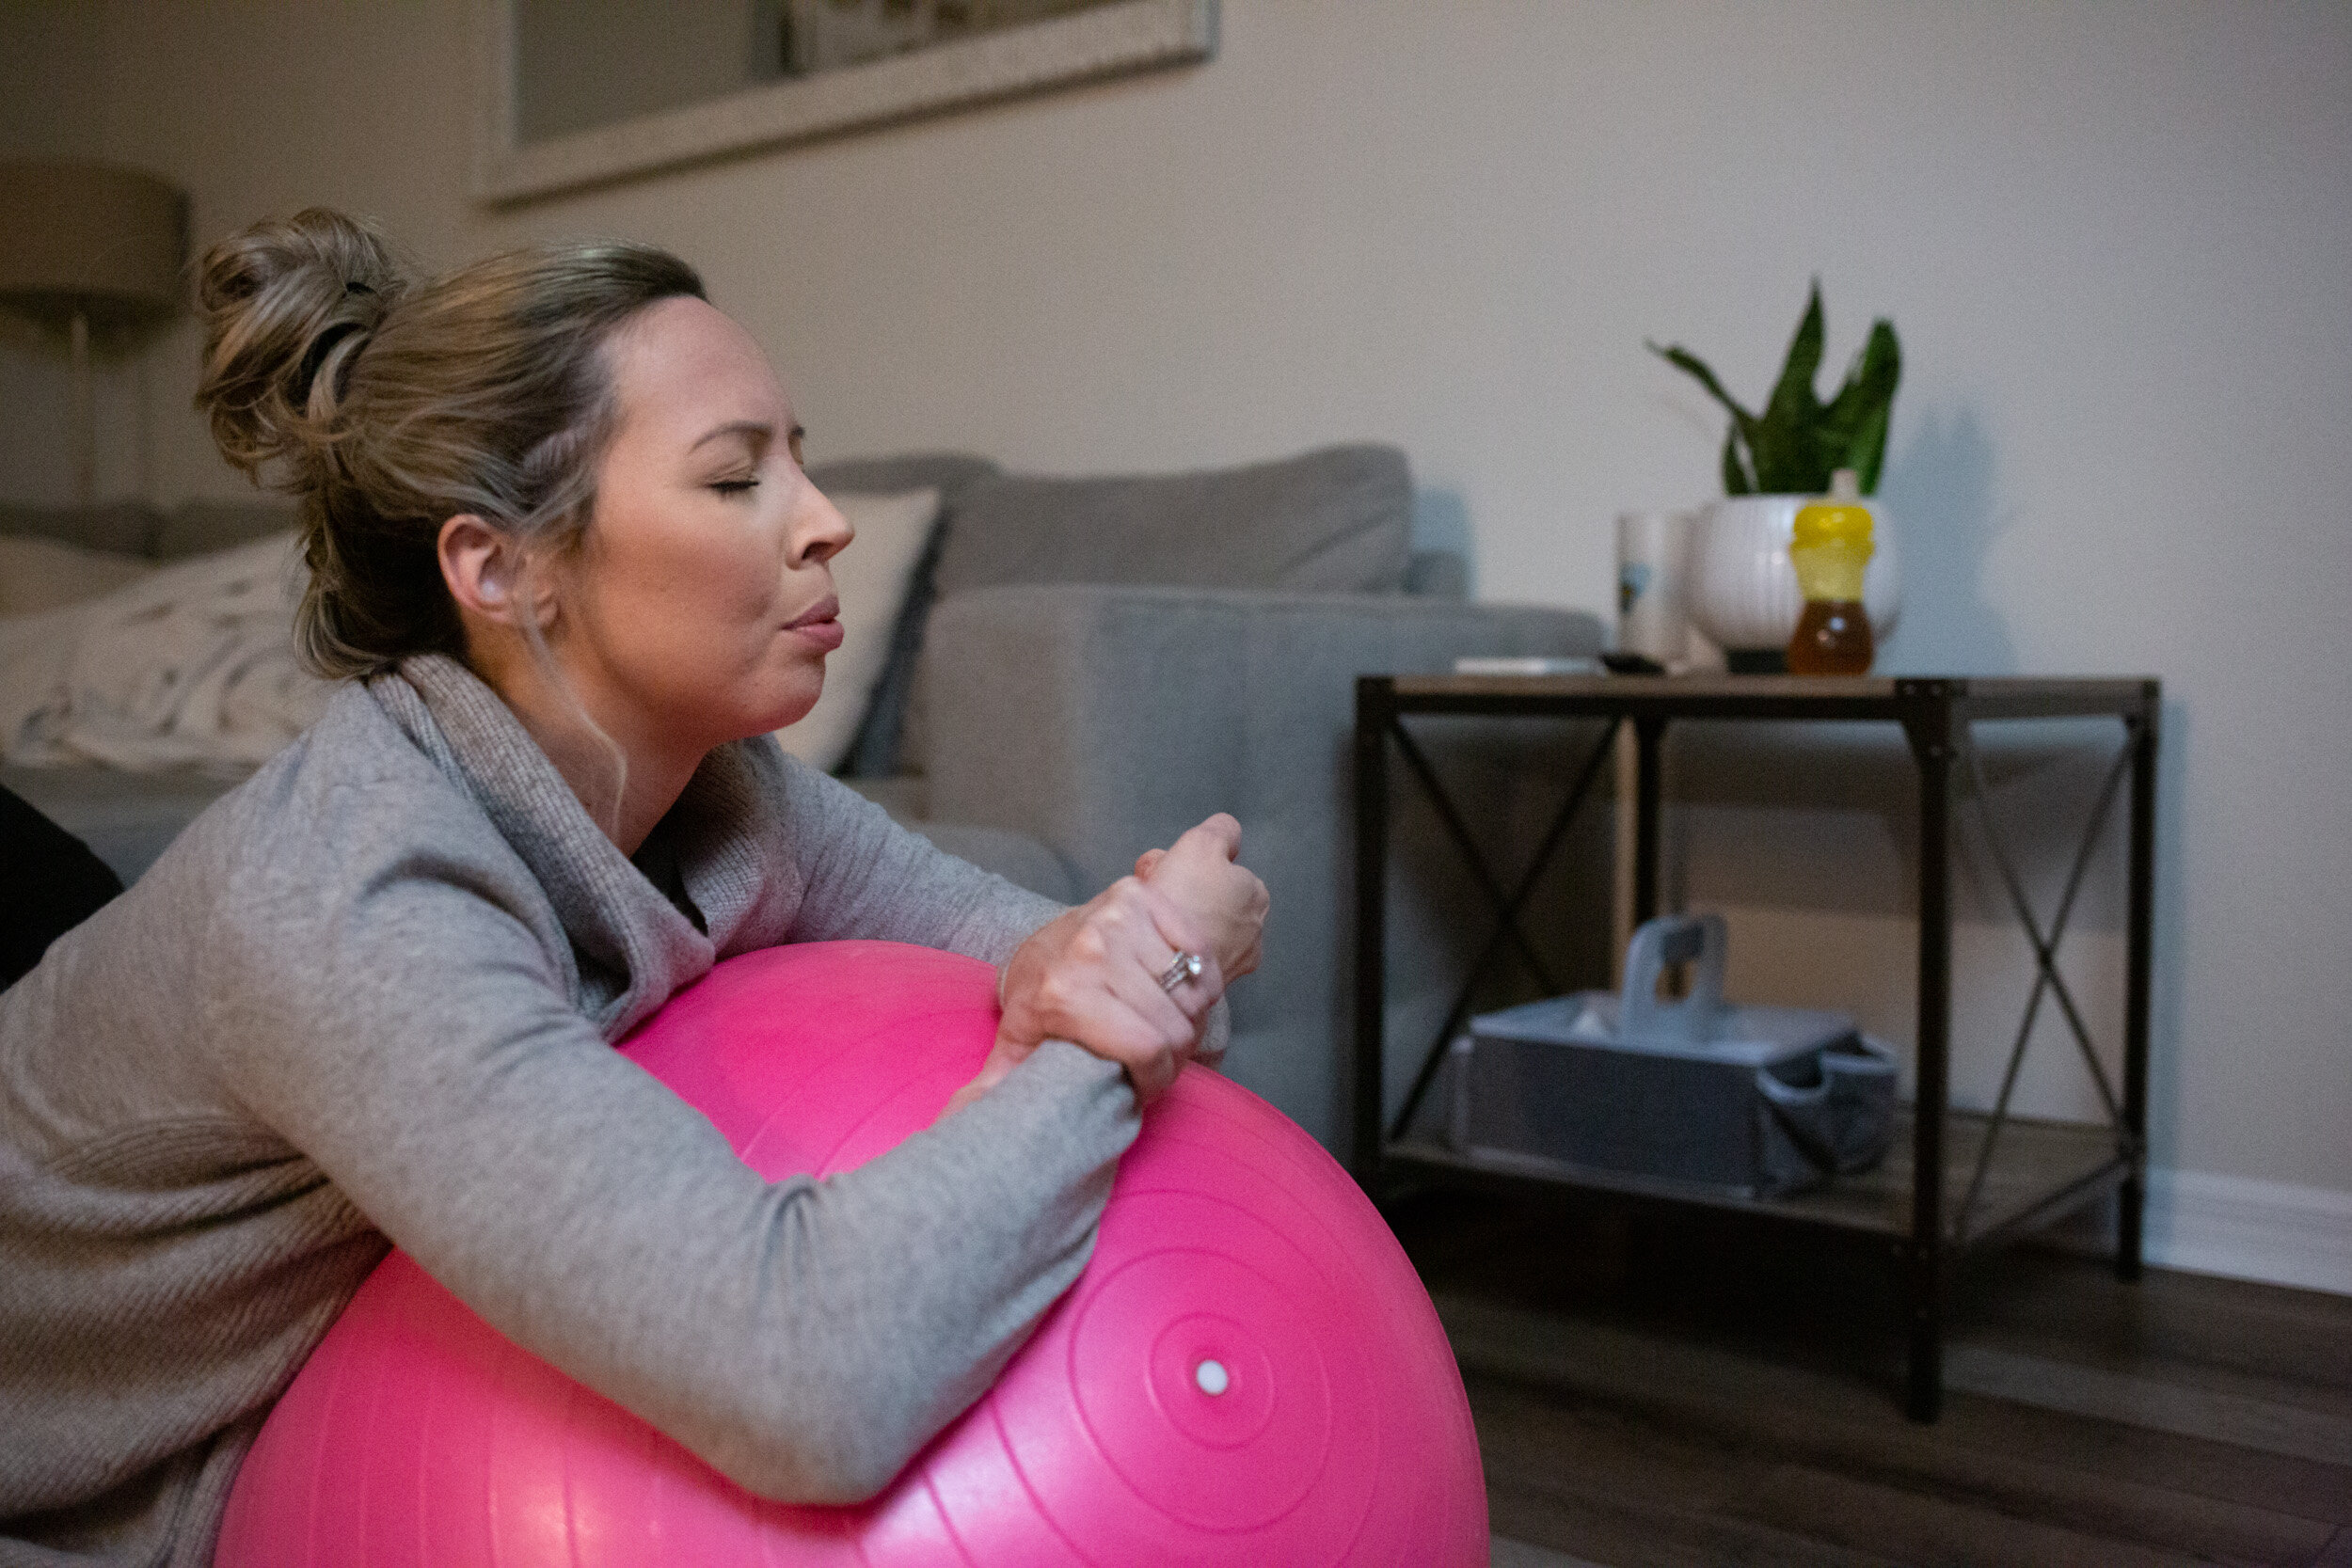 Laboring mom breathing while holding onto birth ball